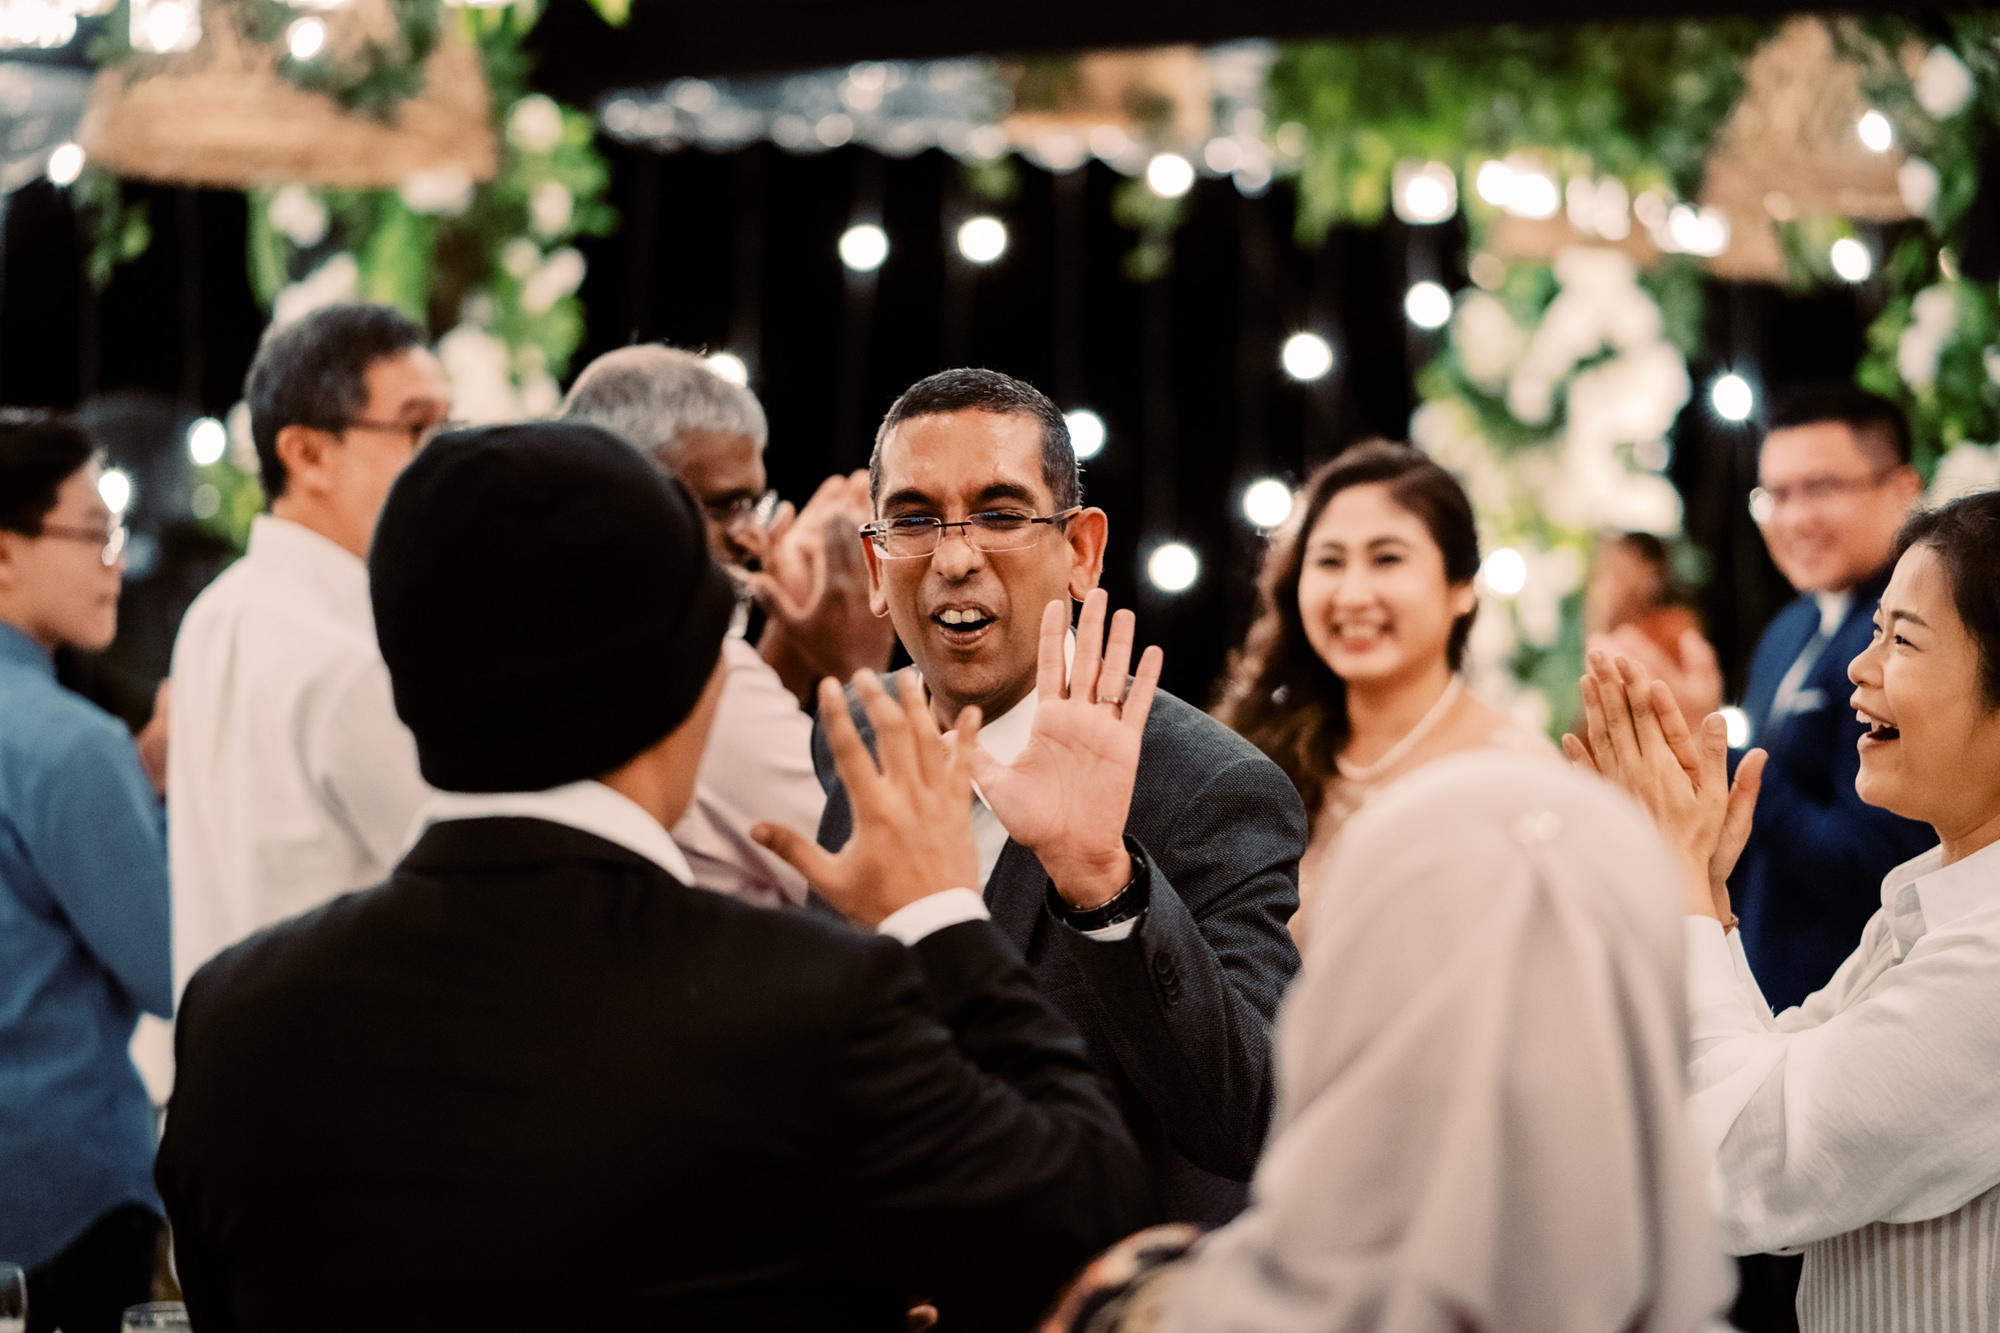 Guests welcome Nadira and Dhillon to their wedding reception at Puncak Dani